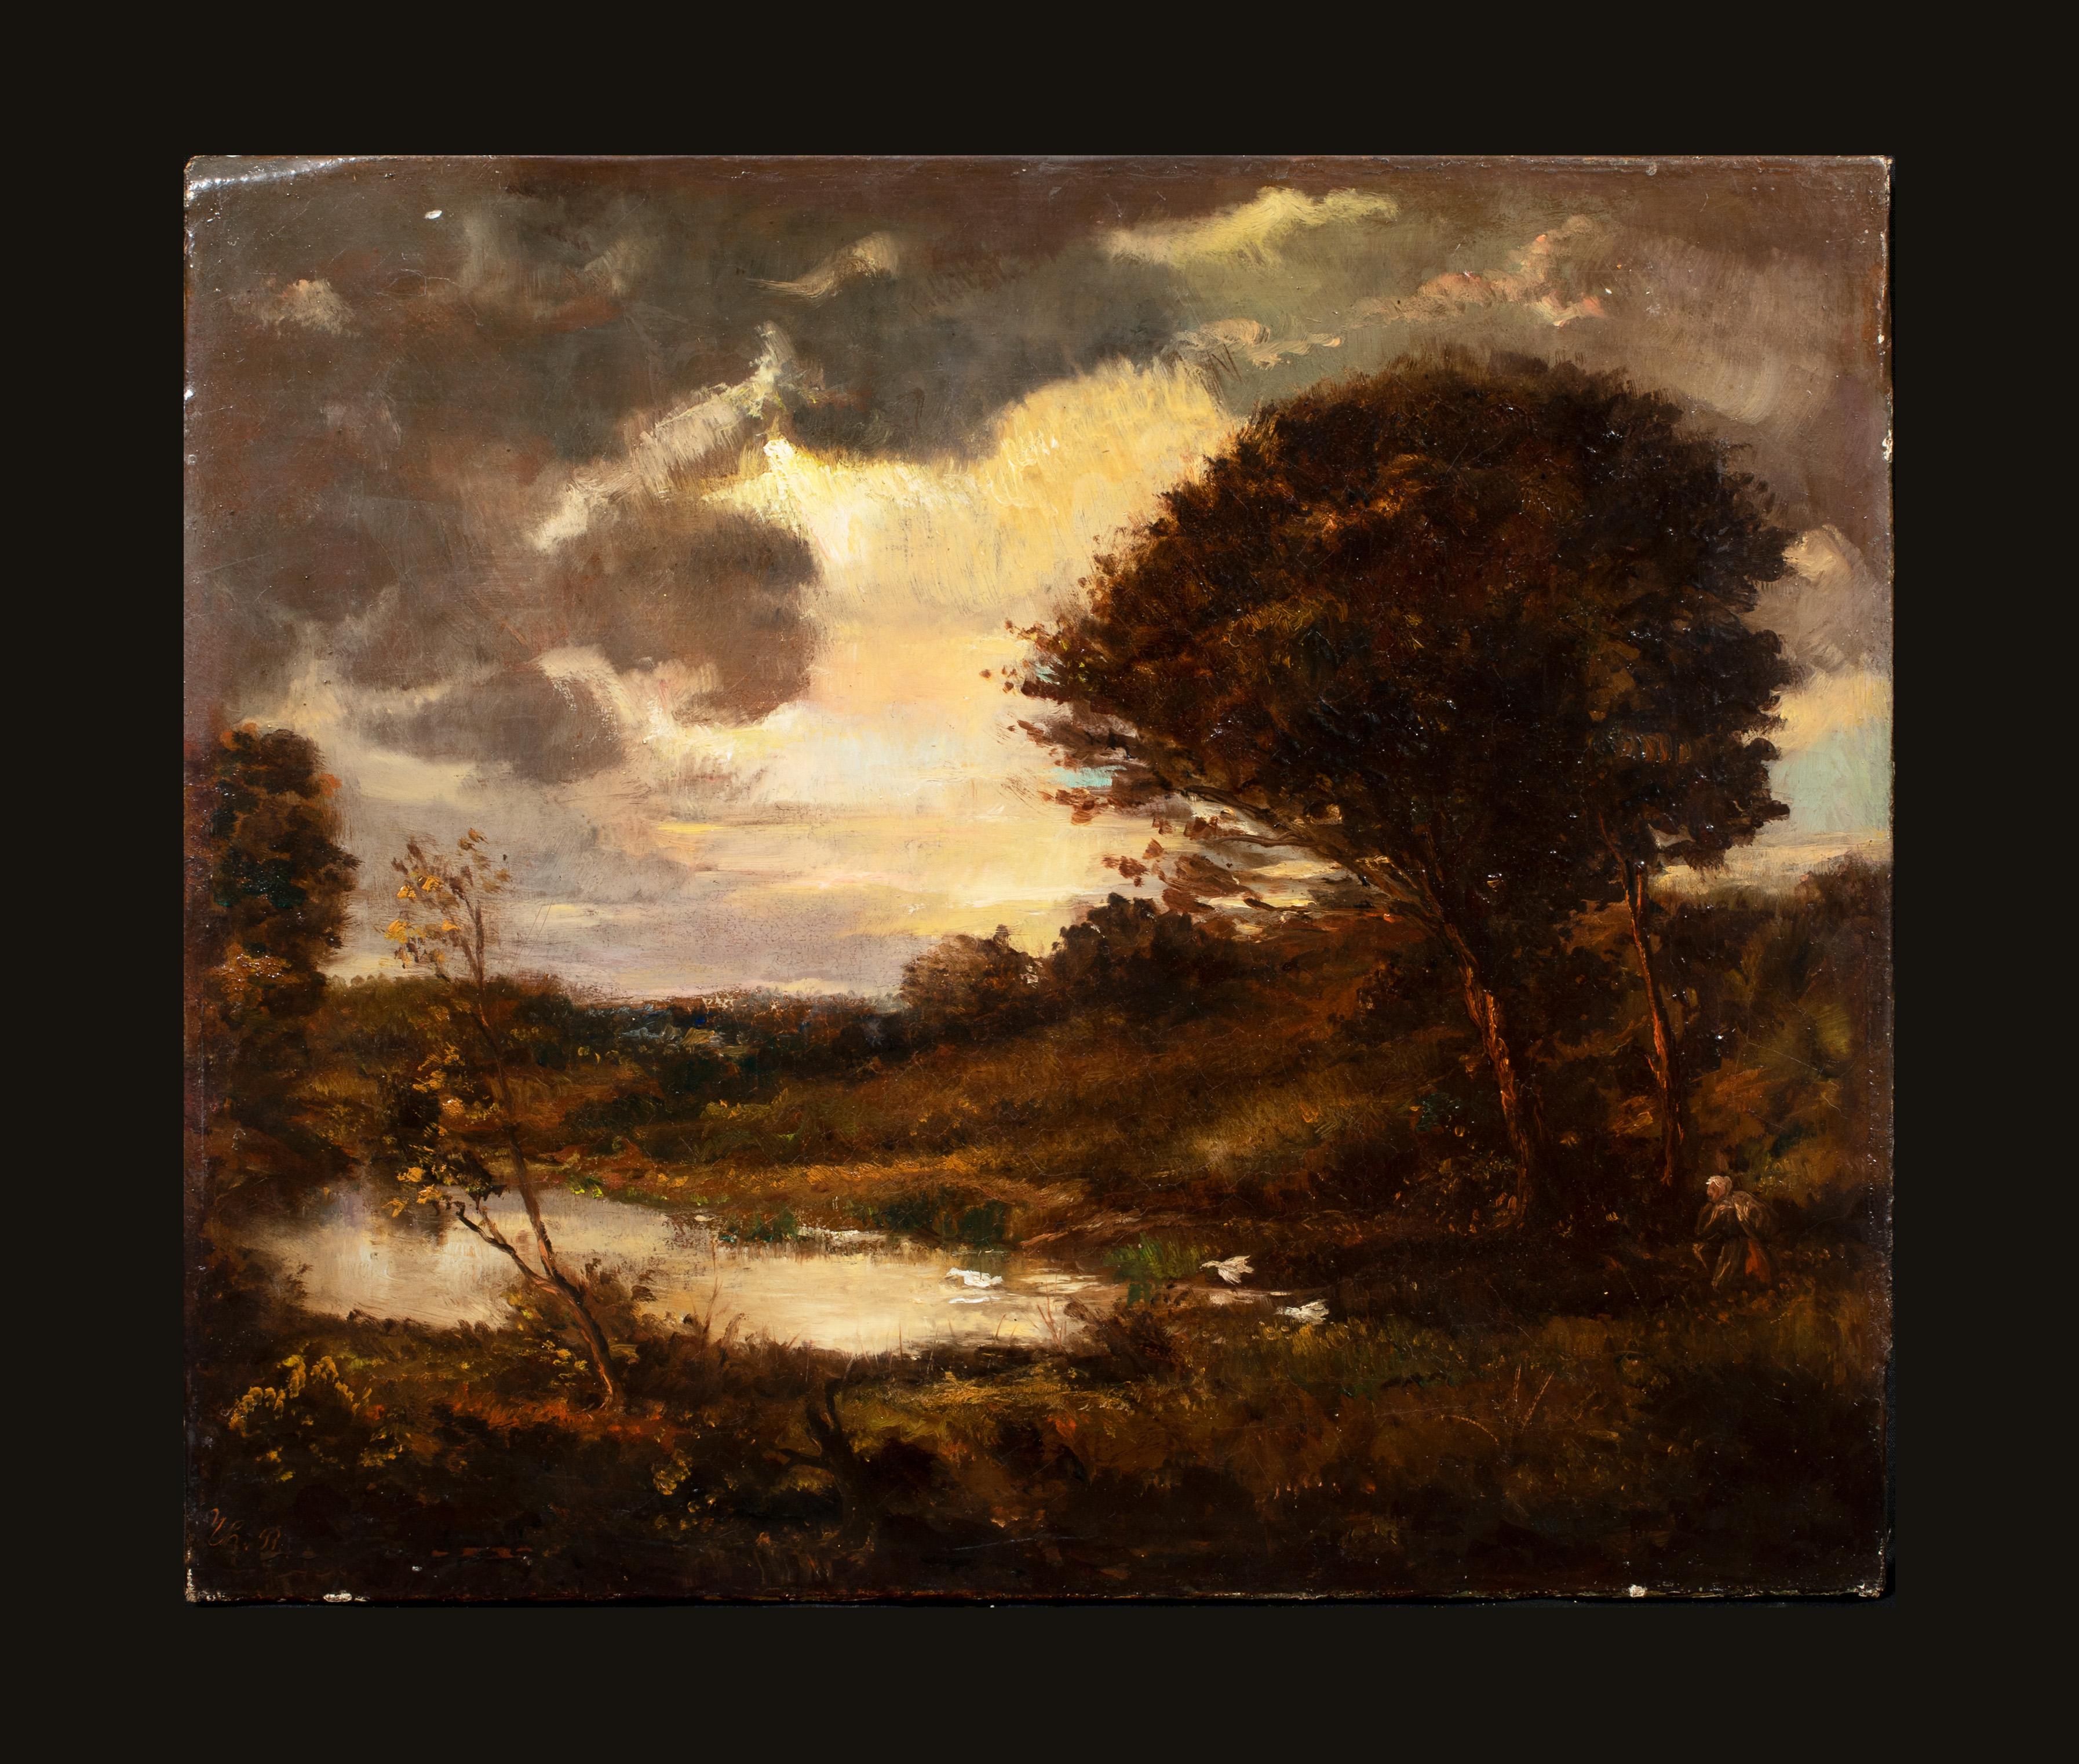 Paysage, 19th Century - Painting by Théodore Rousseau